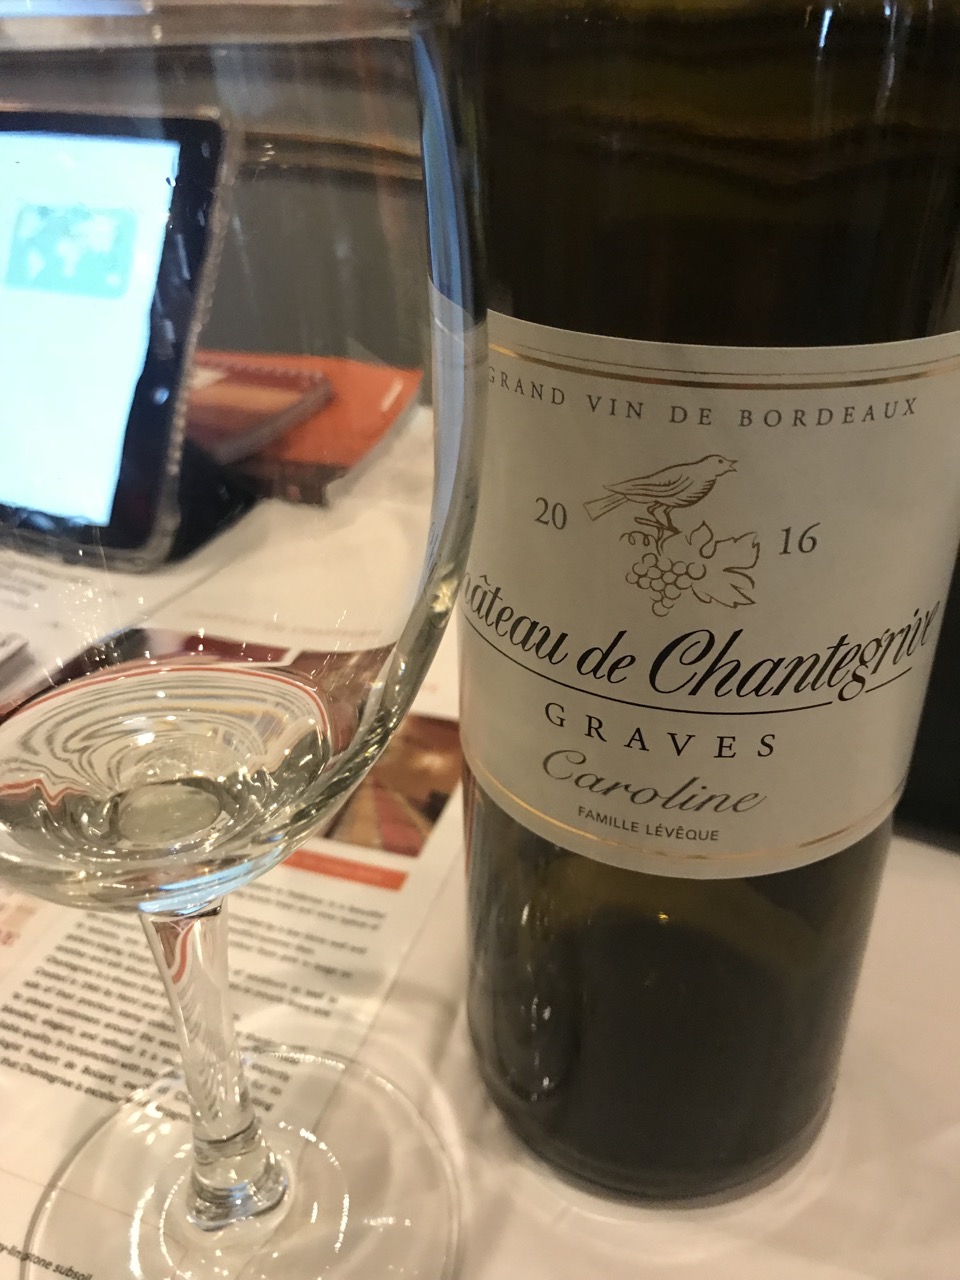 Wine Pessac-Léognan and bottle | from Chronicles 2016 Graves